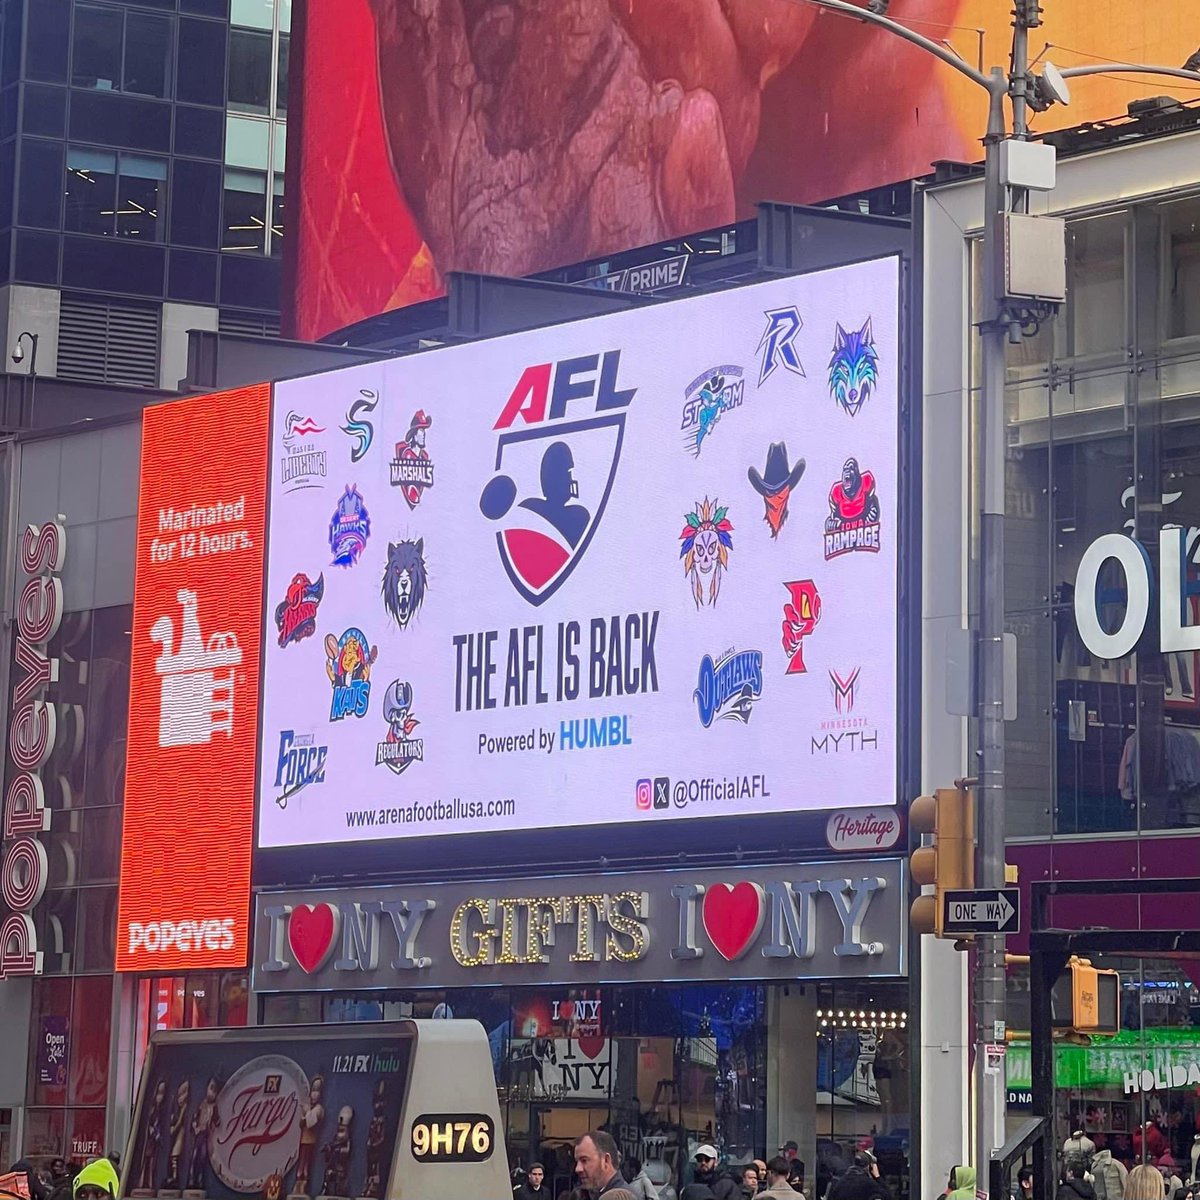 Peep the Marshals logo on a billboard in Times Square as part of tomorrow’s Arena Football League’s announcements! #ThisIsFreakingCool #afl #MarshalsFootball #RapidCityMarshals #TimesSquare #GreatestShowOnTurf